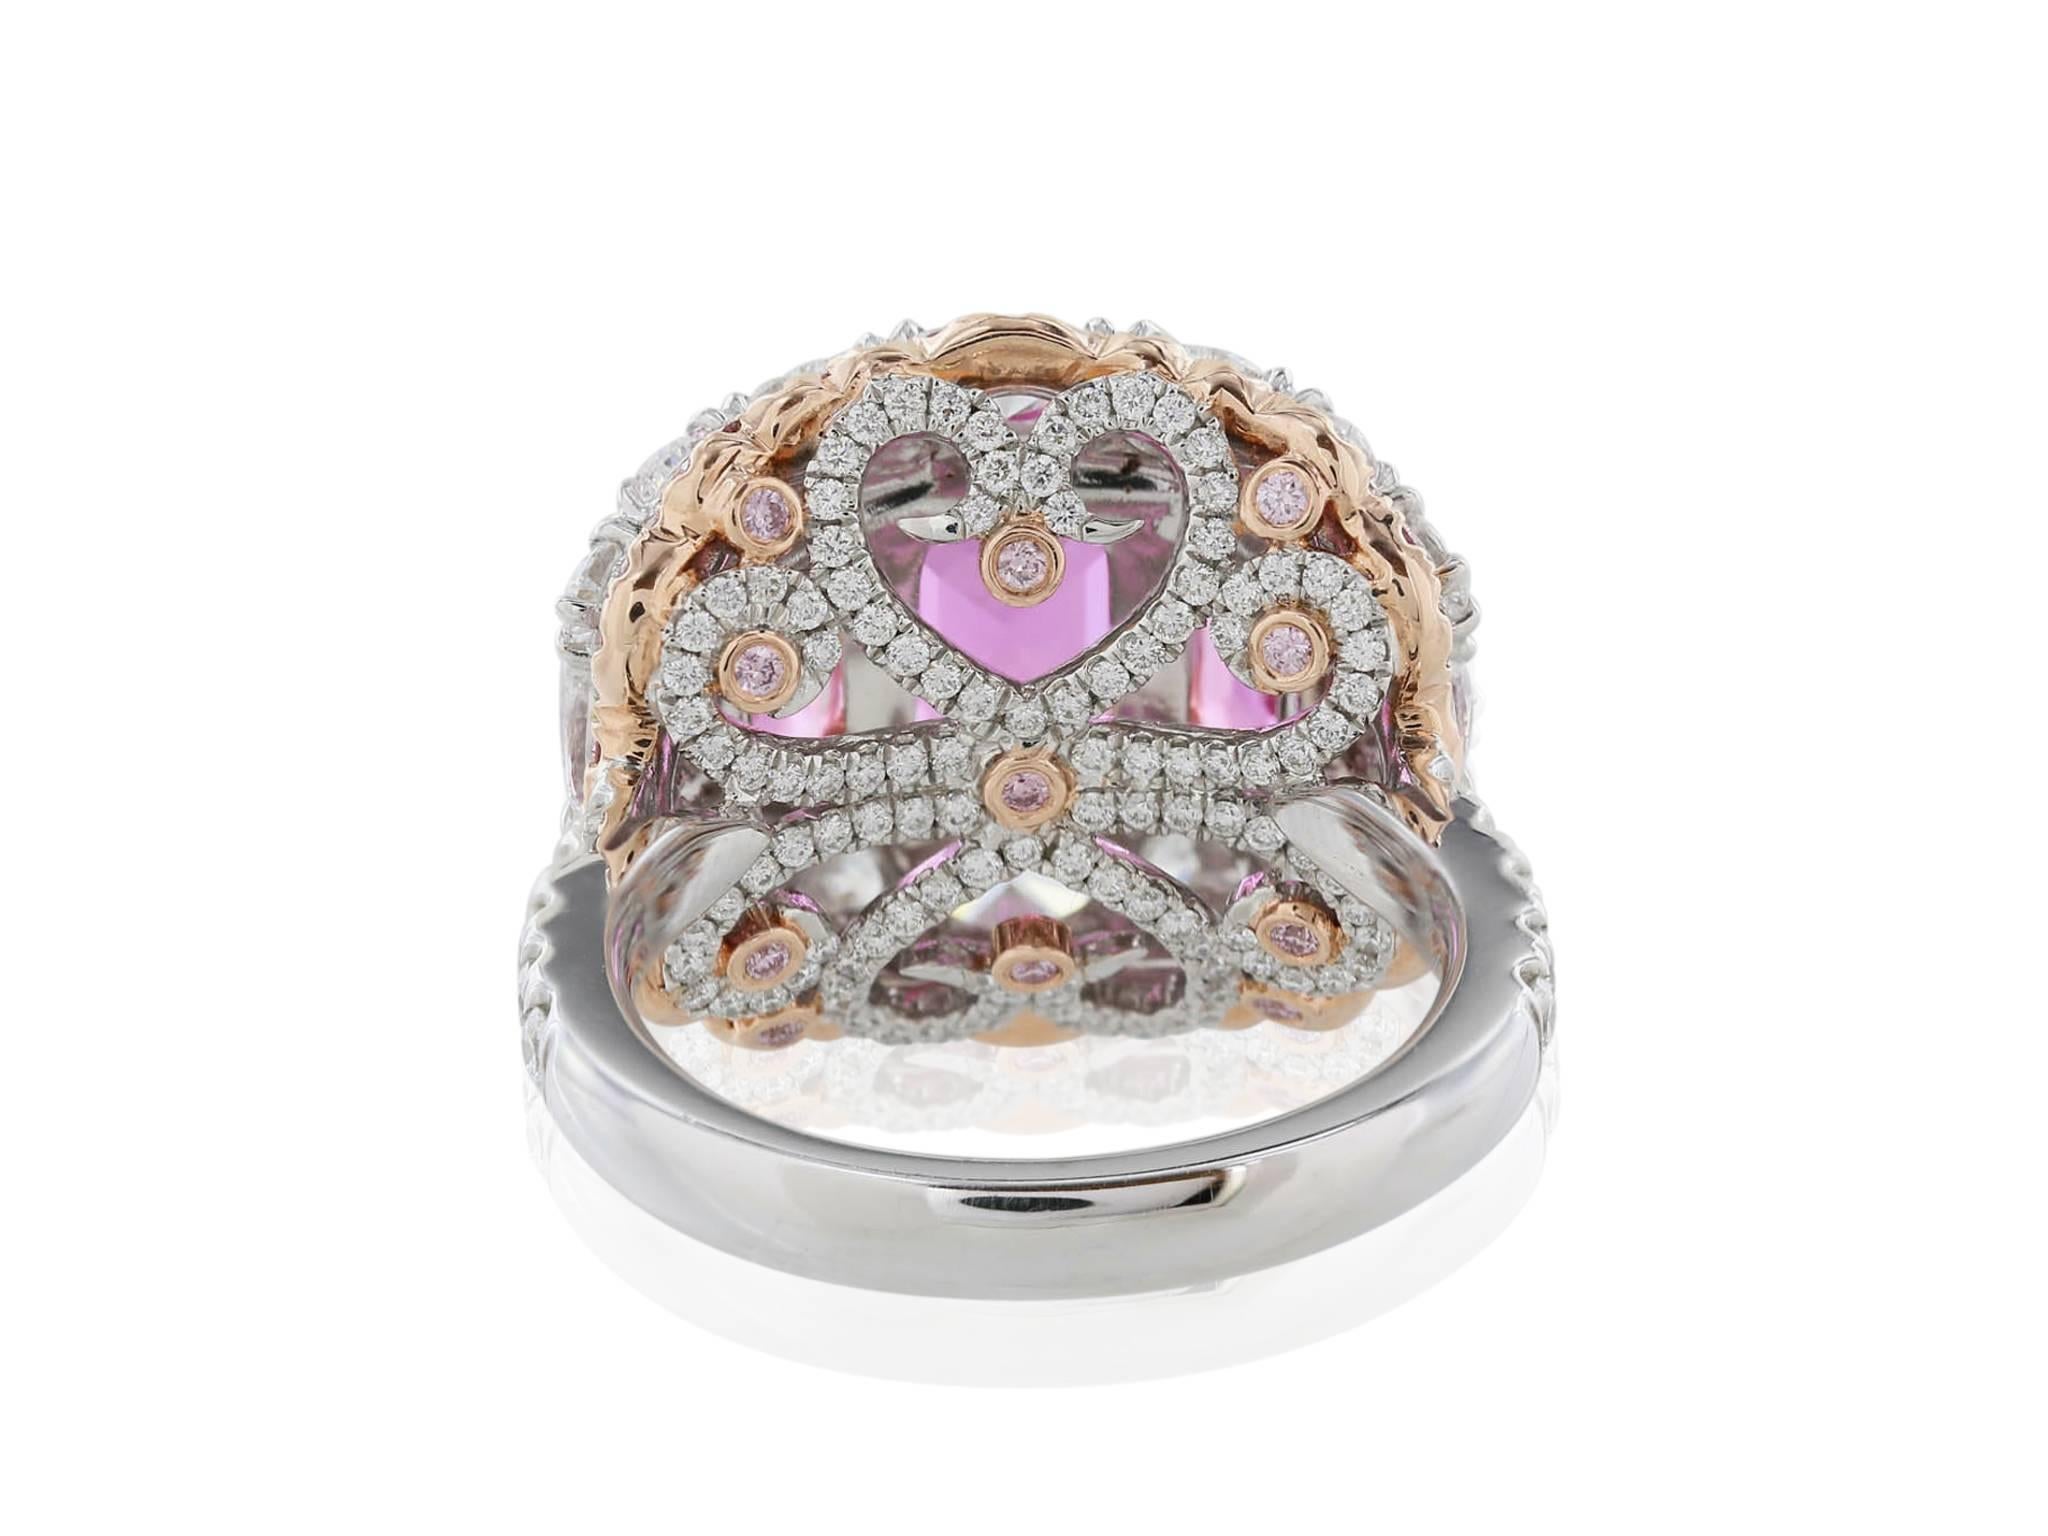 Women's 5.34 Carat Unheated Pink Sapphire Diamond Cluster Ring For Sale